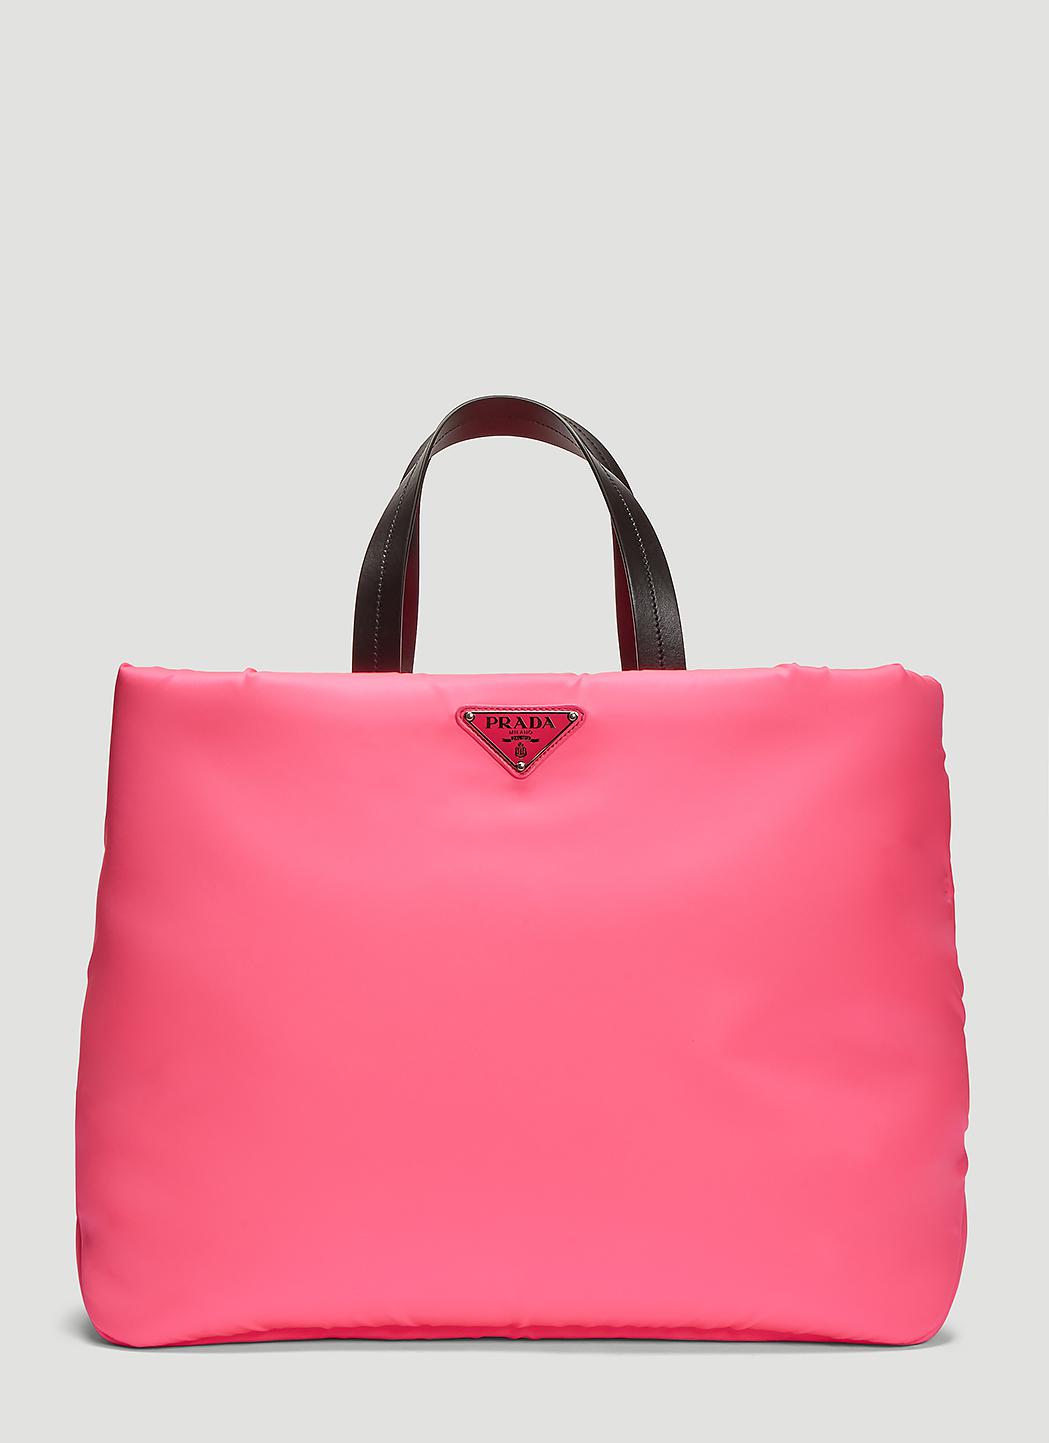 Prada Synthetic Padded Neon Nylon Tote Bag In Pink - Lyst